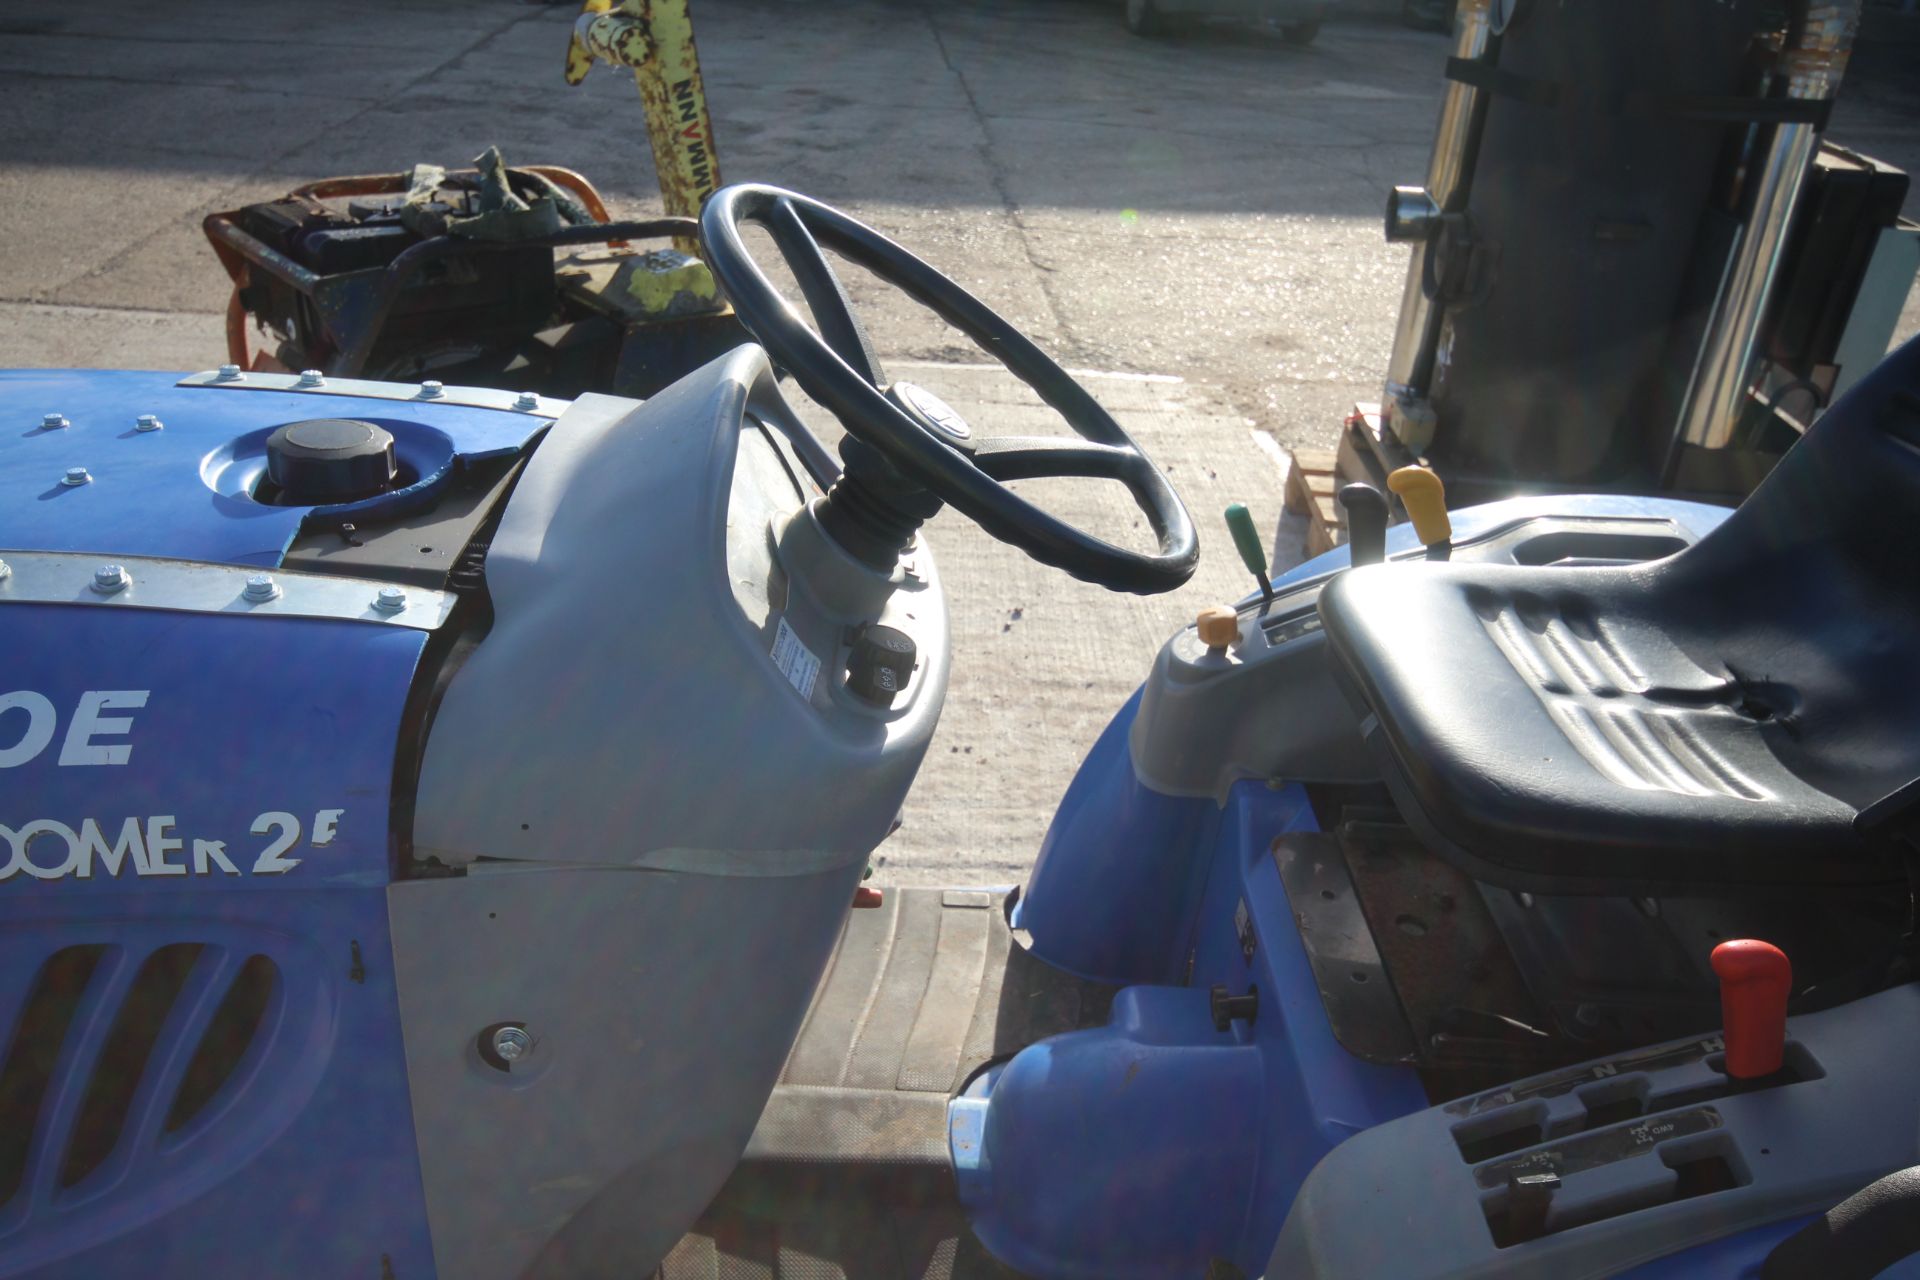 **UDATED DESCRIPTION** New Holland Boomer 25 4WD compact tractor. Registration EU17 AXK. Date of - Image 11 of 50